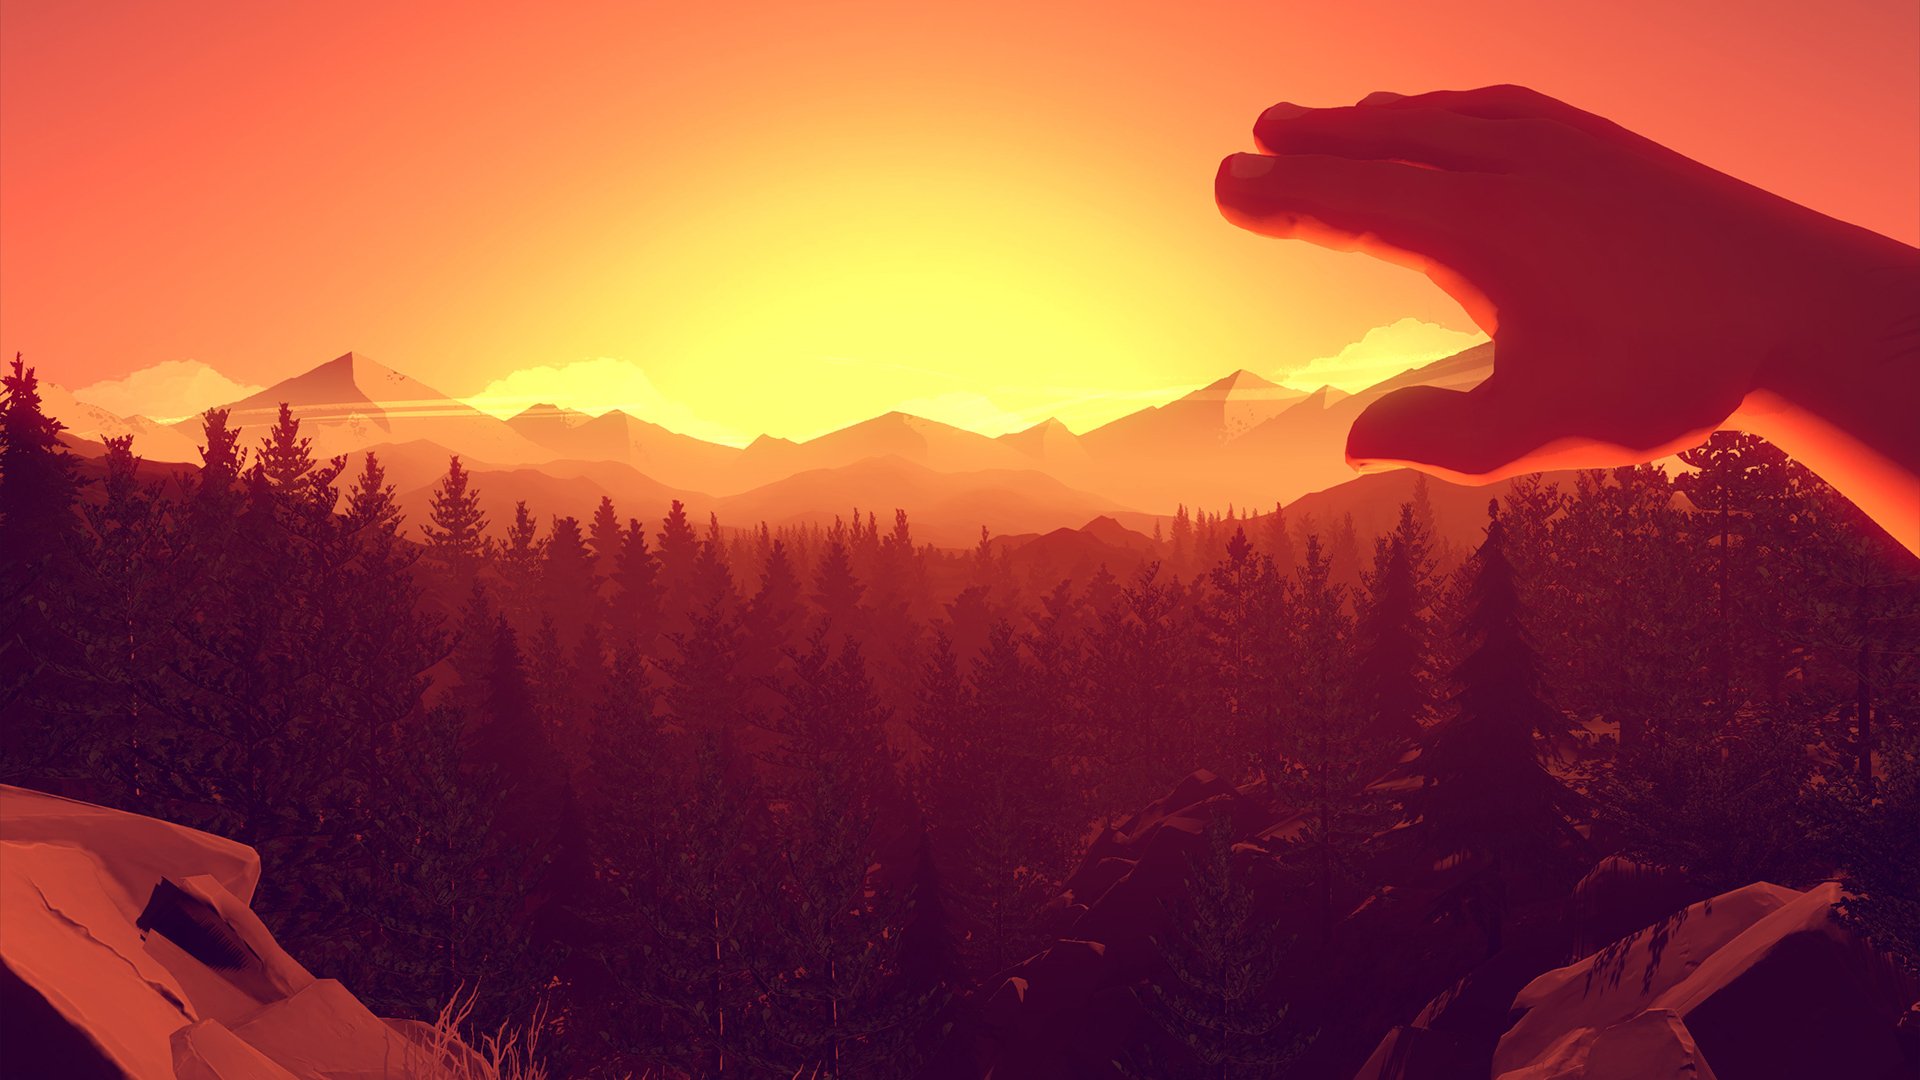 firewatch the game ending